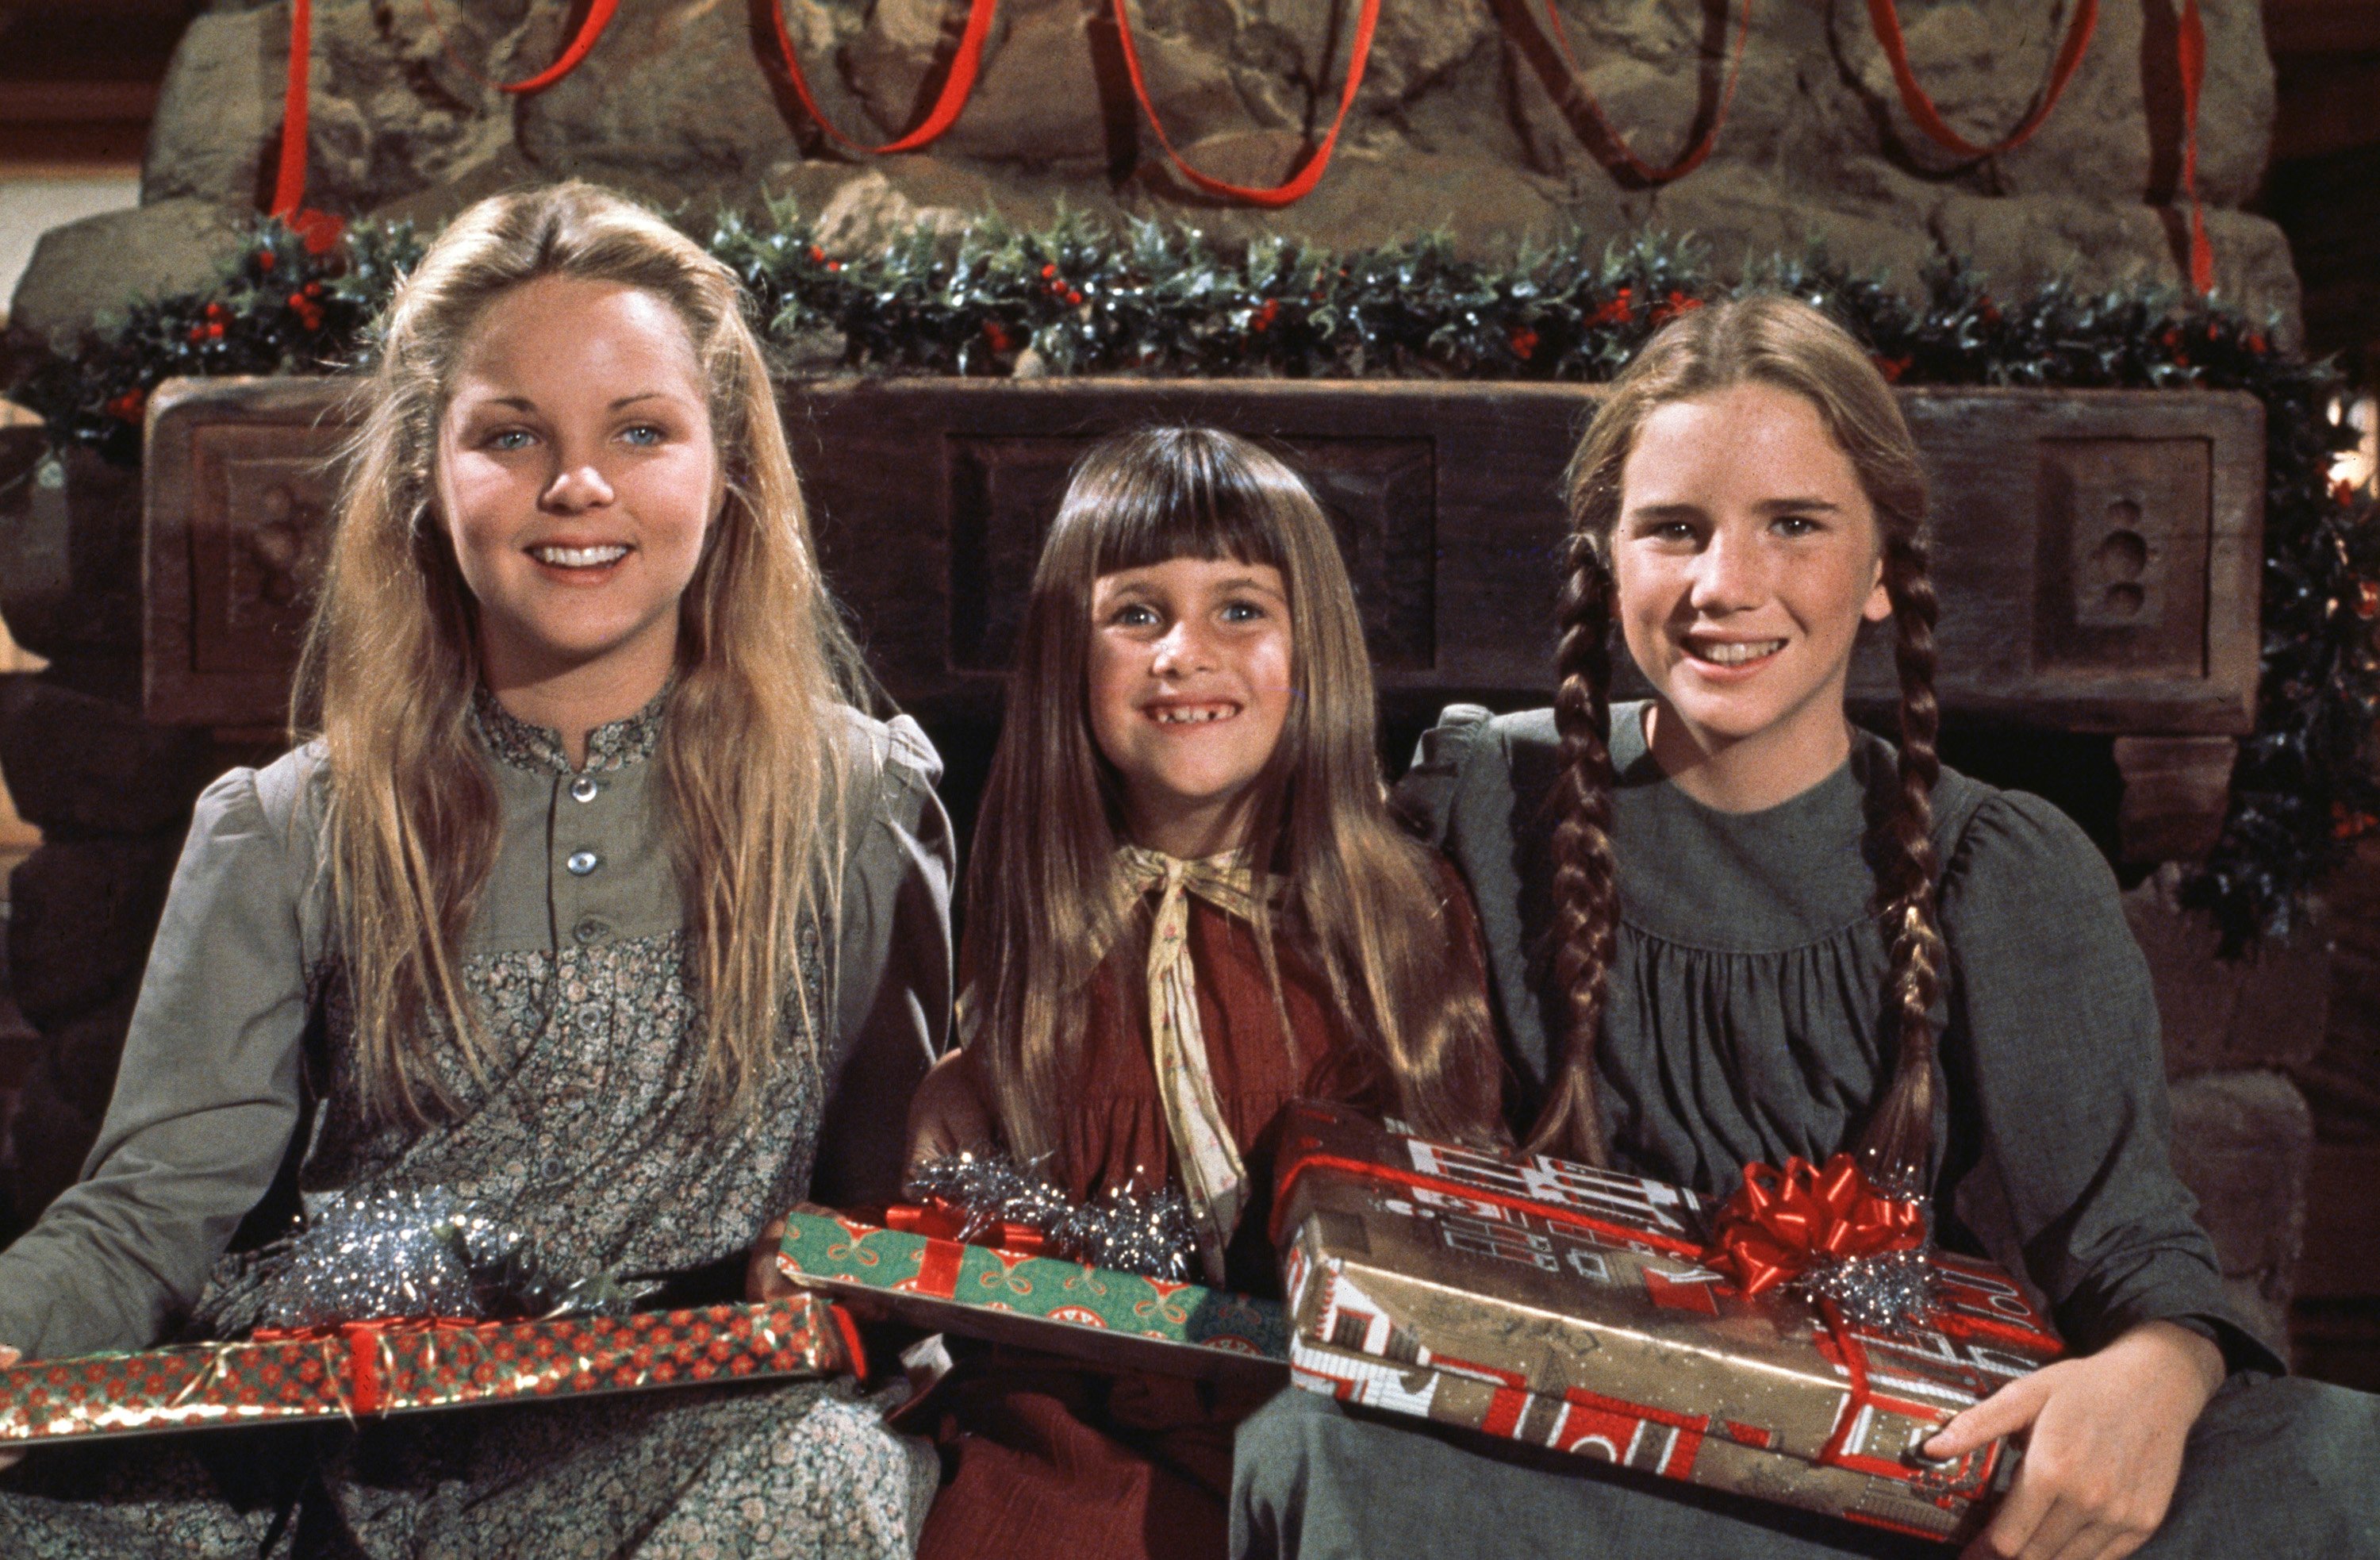 Left to right: Melissa Sue Anderson as Mary Ingalls, Lindsay/Sidney Greenbush as Carrie Ingalls, and Melissa Gilbert as Laura Ingalls on 'Little House on the Prairie'